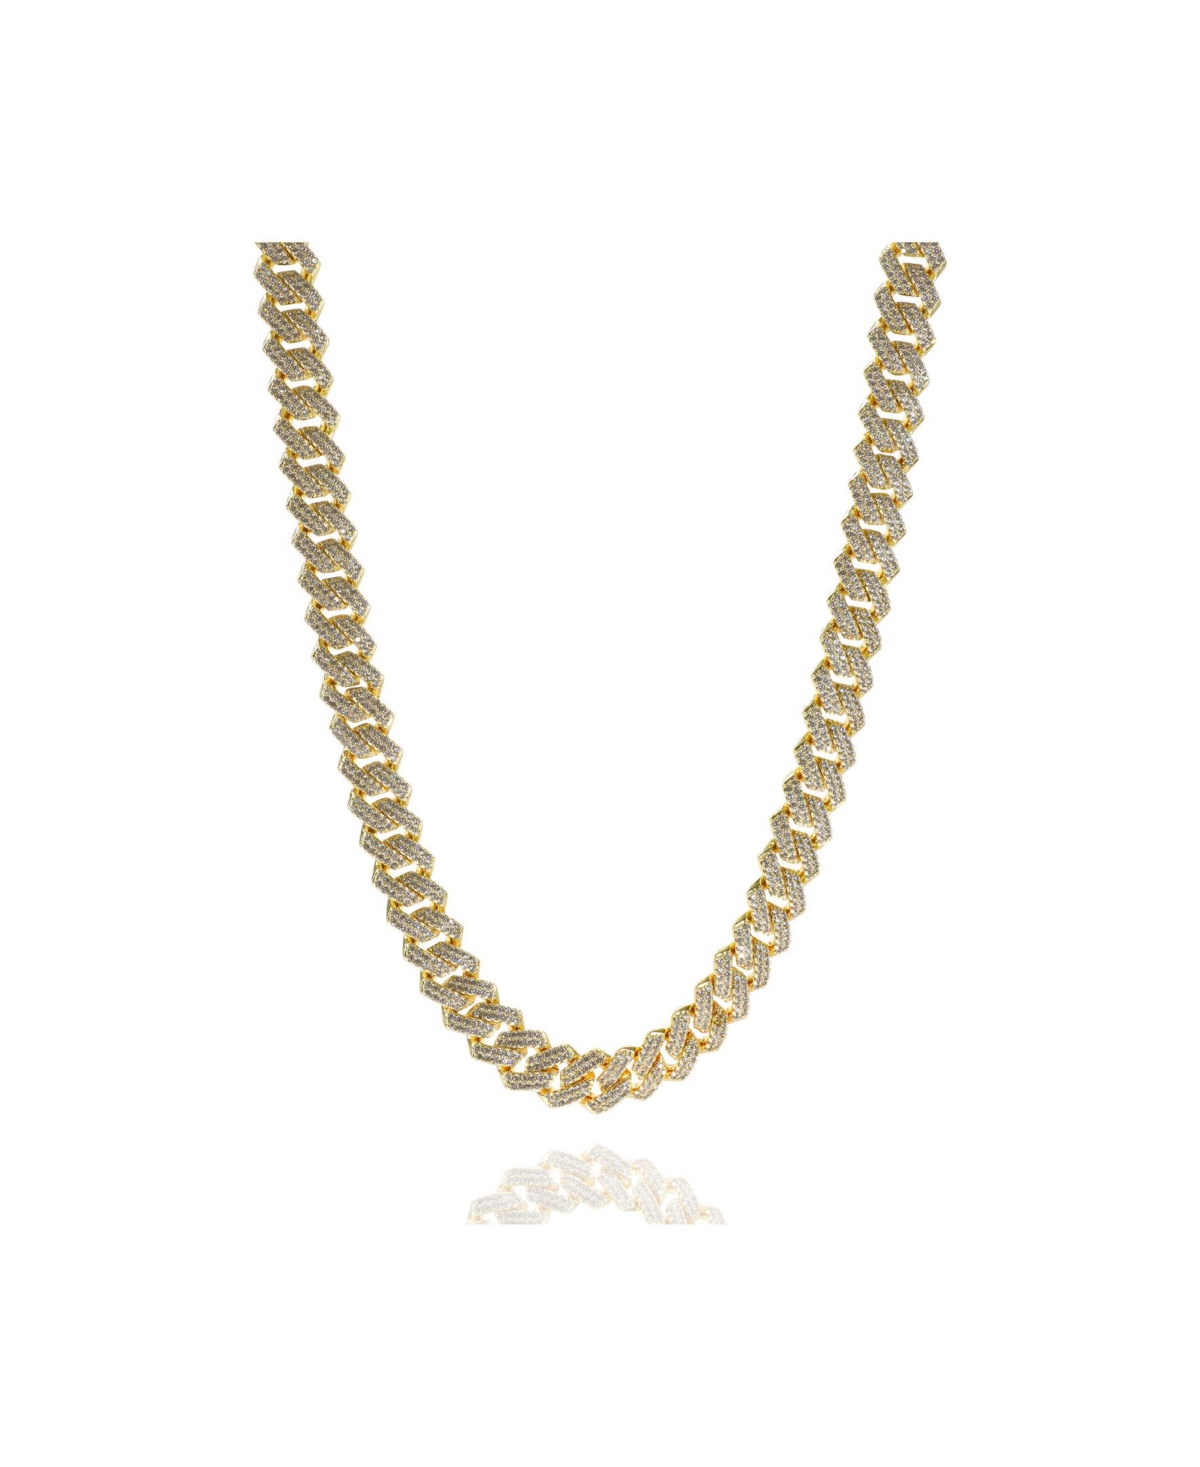 Frosty Link Collection Wide Necklace - Gold Tone